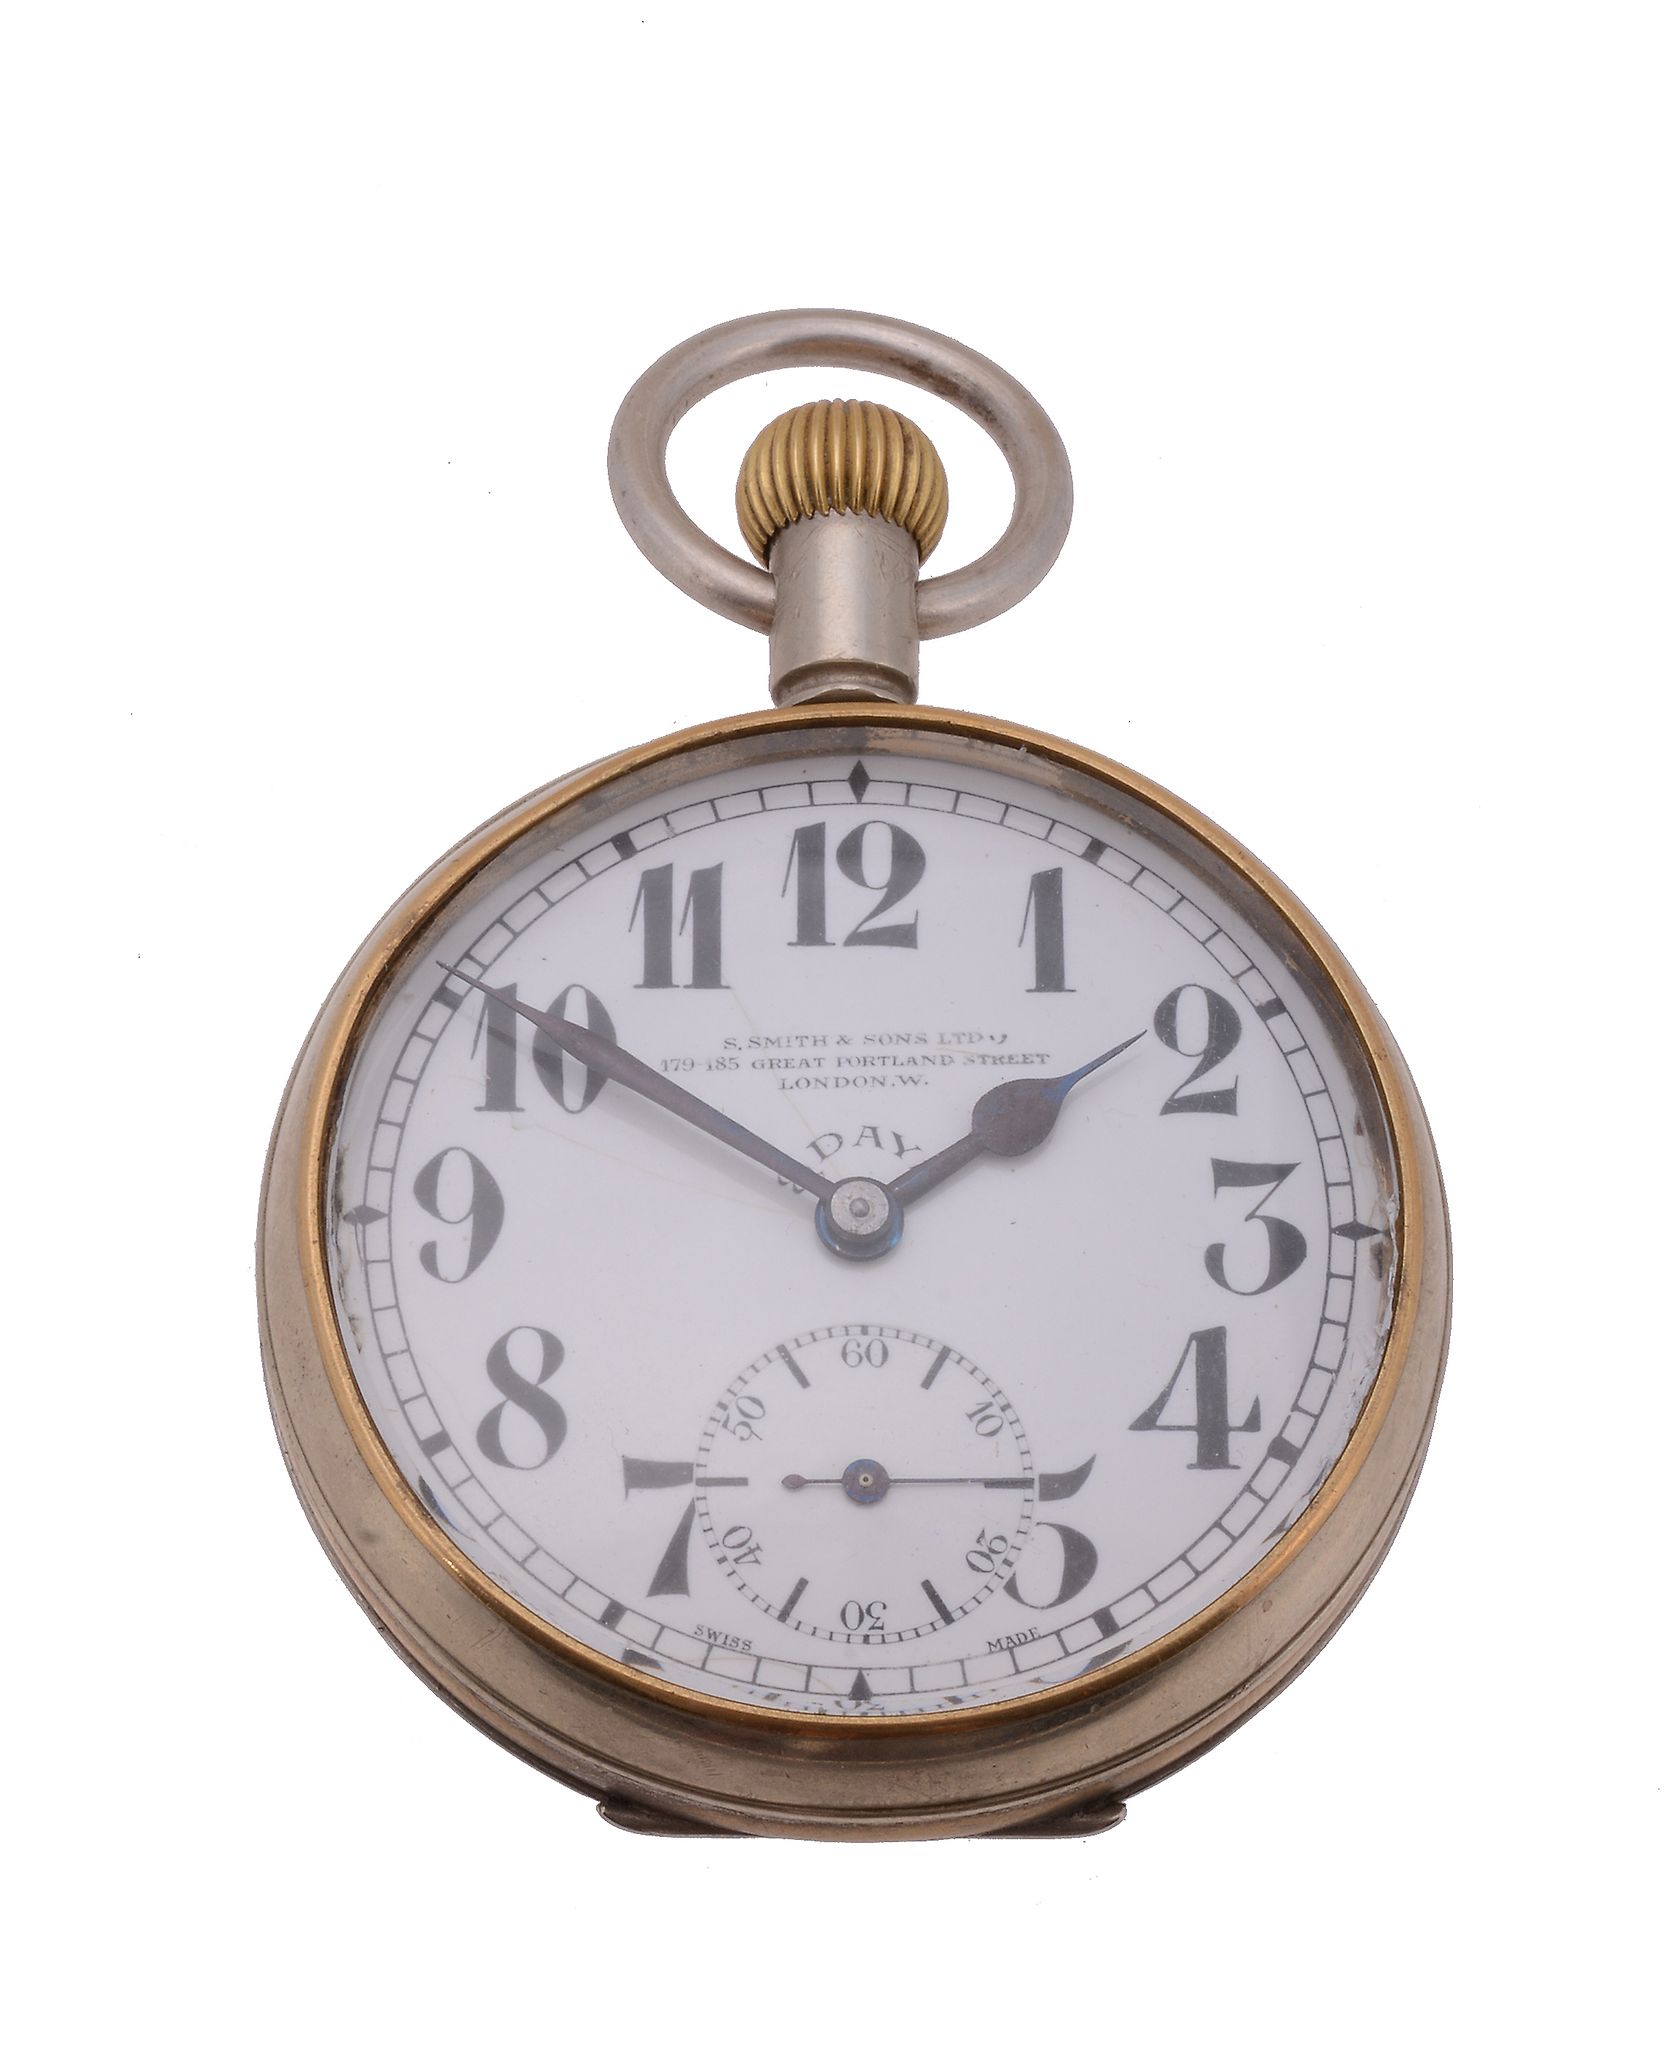 S. Smith & Sons Ltd., a nickel and brass open face 8 day military pocket watch, no. 143278, circa